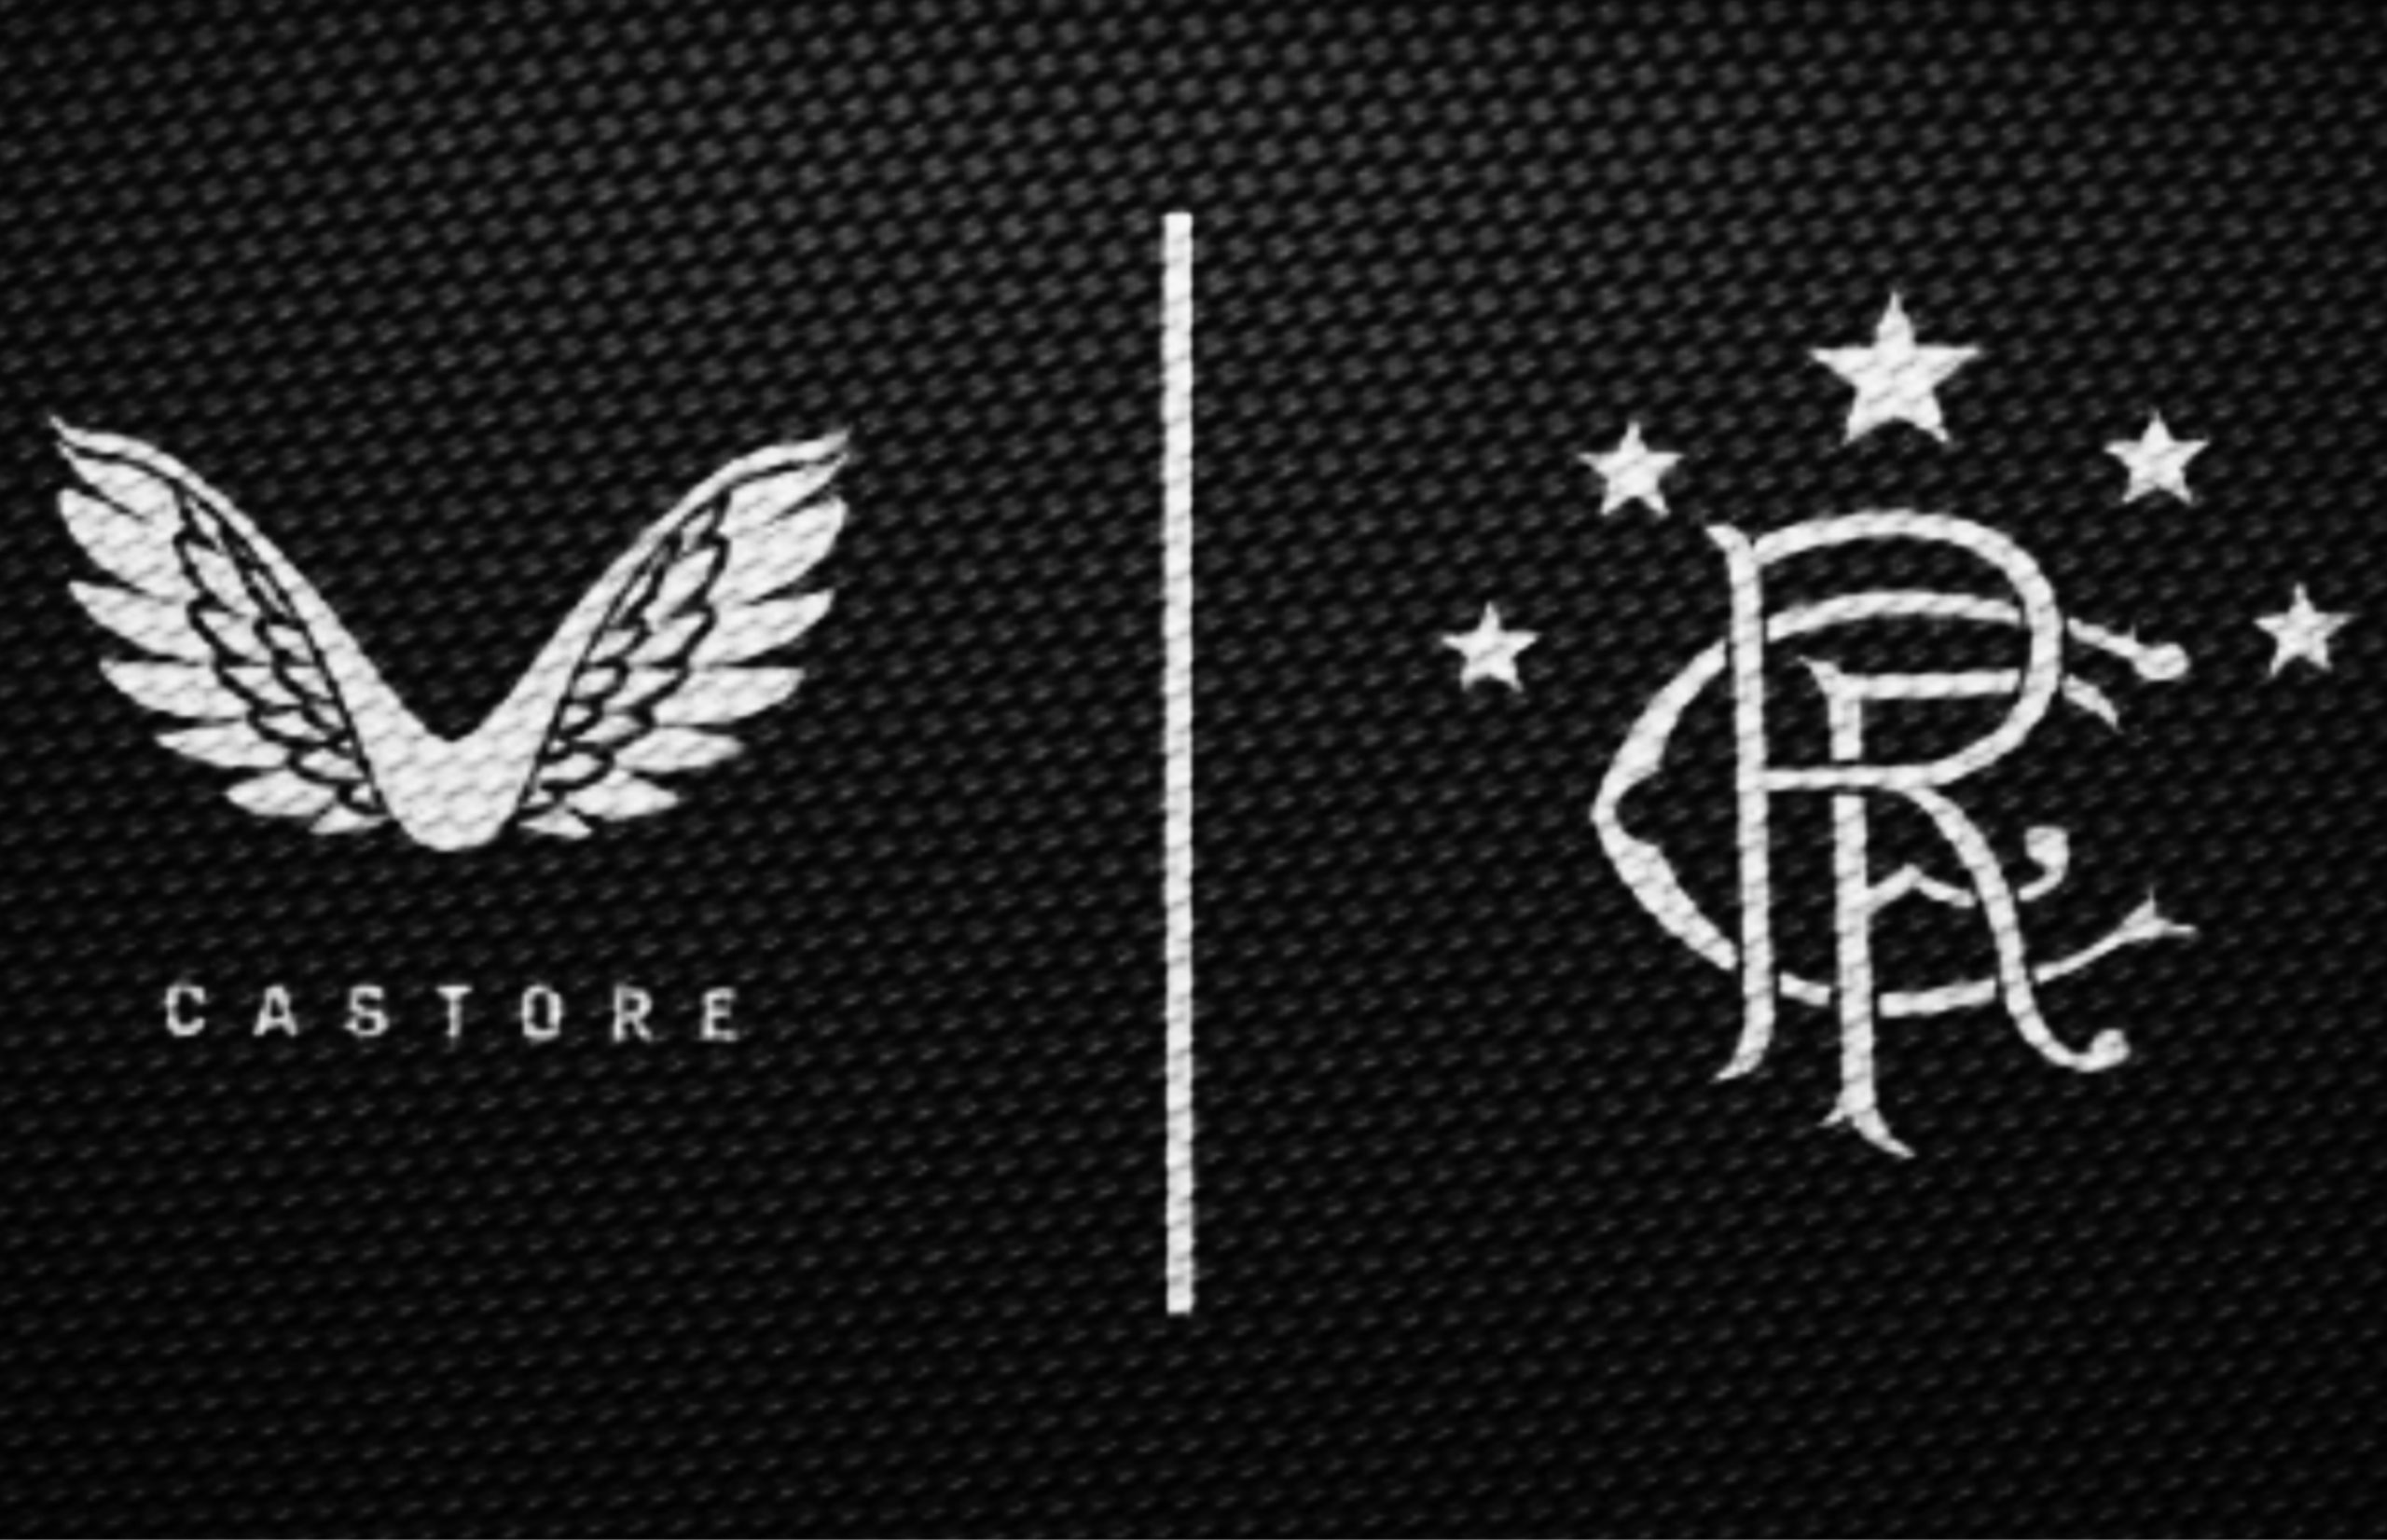 (Photo) Home kit concept with Castore logo goes viral among Rangers fans